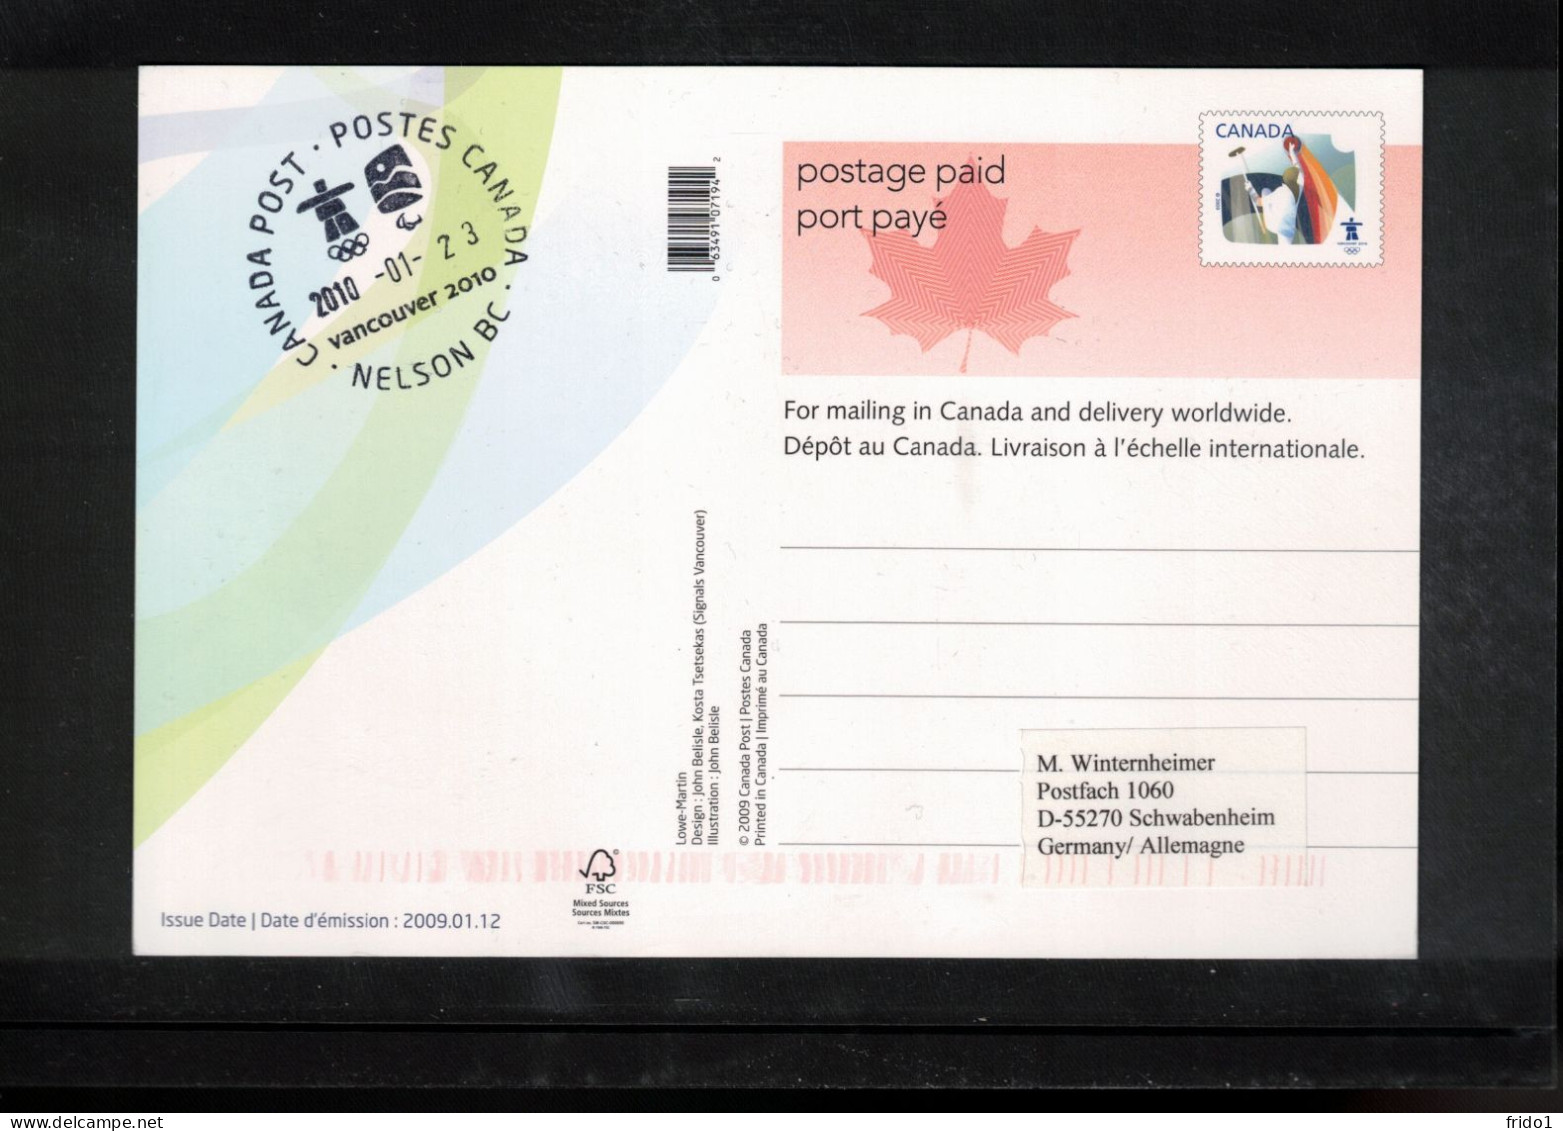 Canada 2010 Olympic Games Vancouver - NELSON BC Postmark Interesting Postcard - Hiver 2010: Vancouver